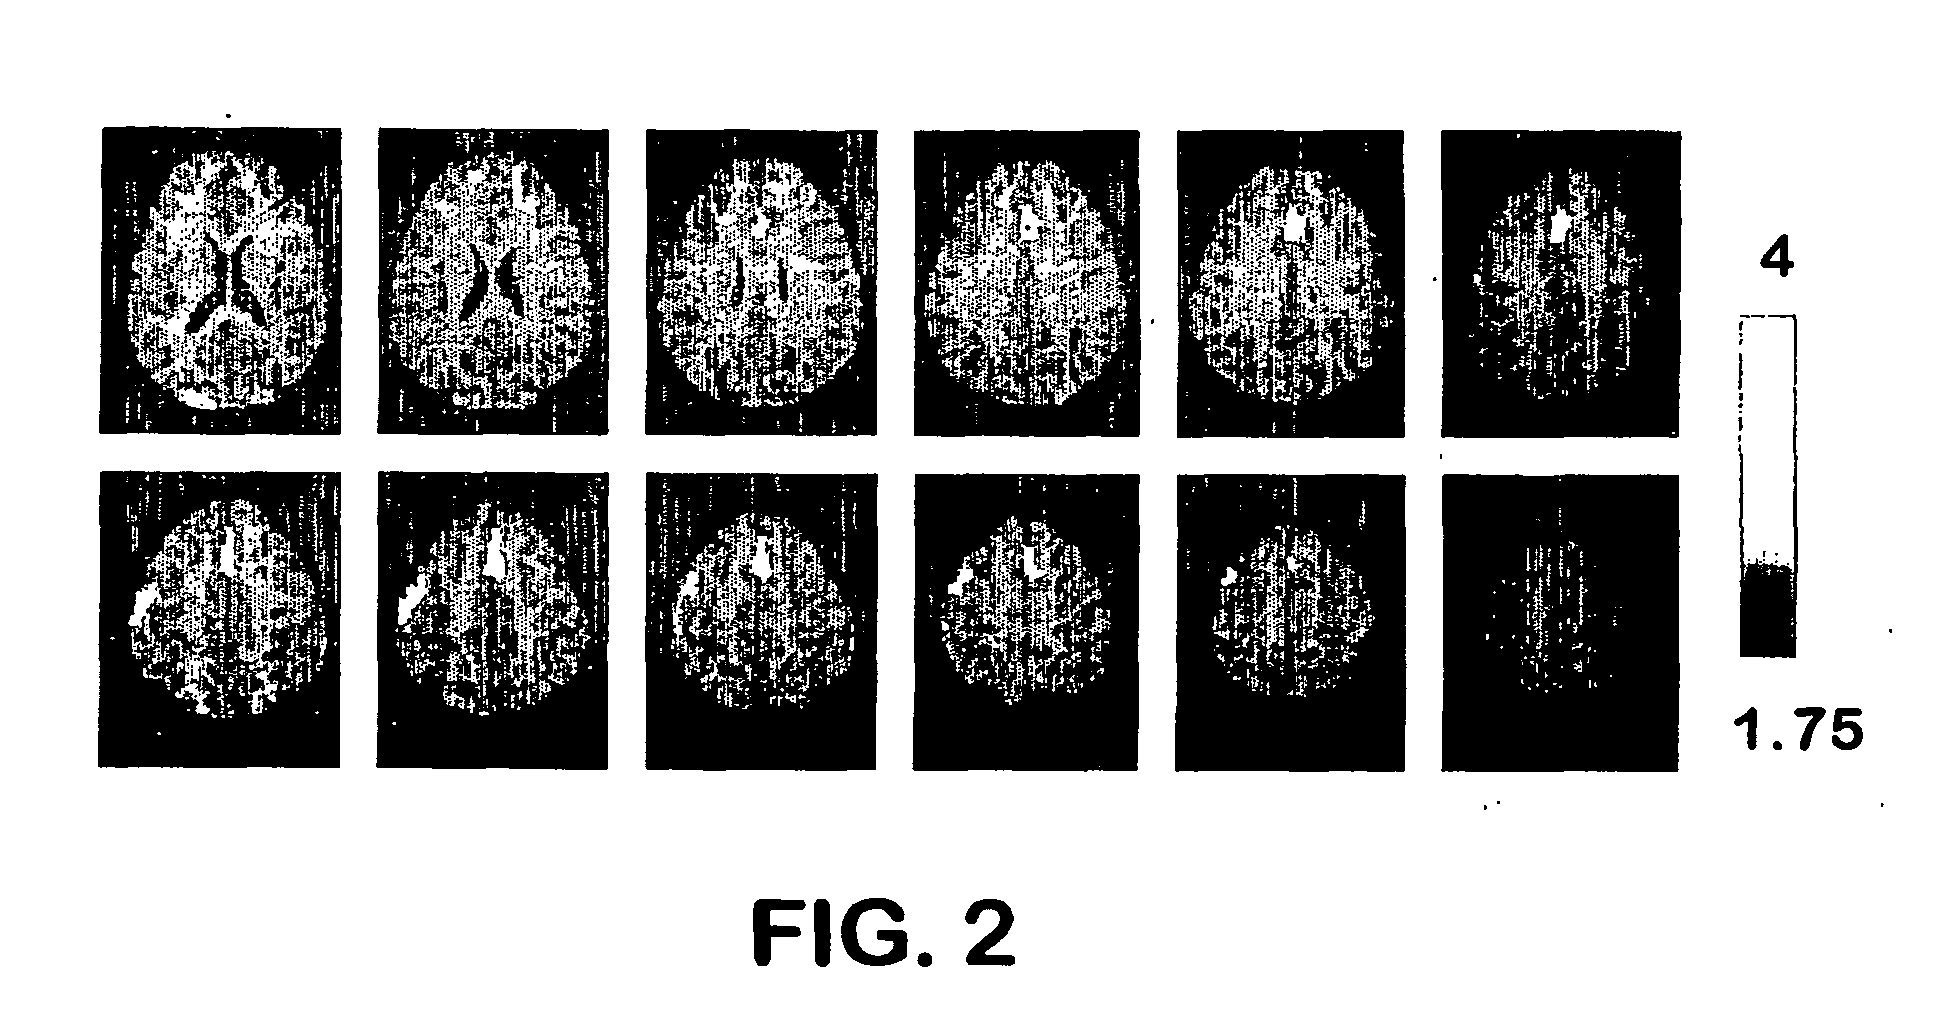 Functional brain imaging for detecting and assessing deception and concealed recognition, and cognitive/emotional response to information